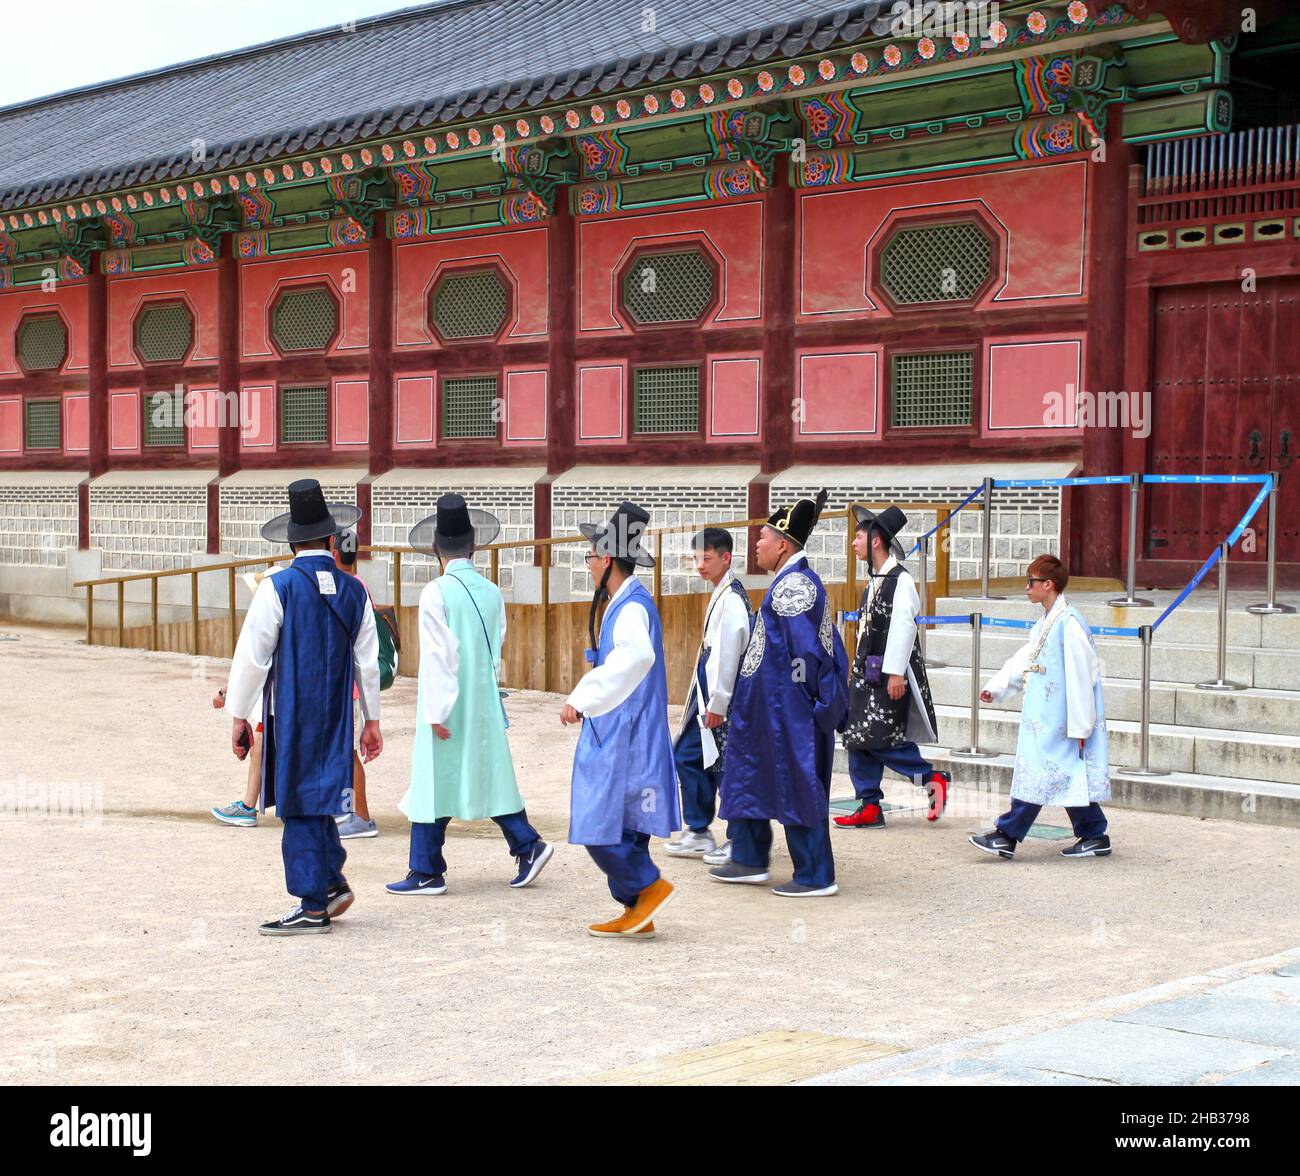 Visitors Dressed In Hanbok Traditional Costumes At The Gyeongbokgung